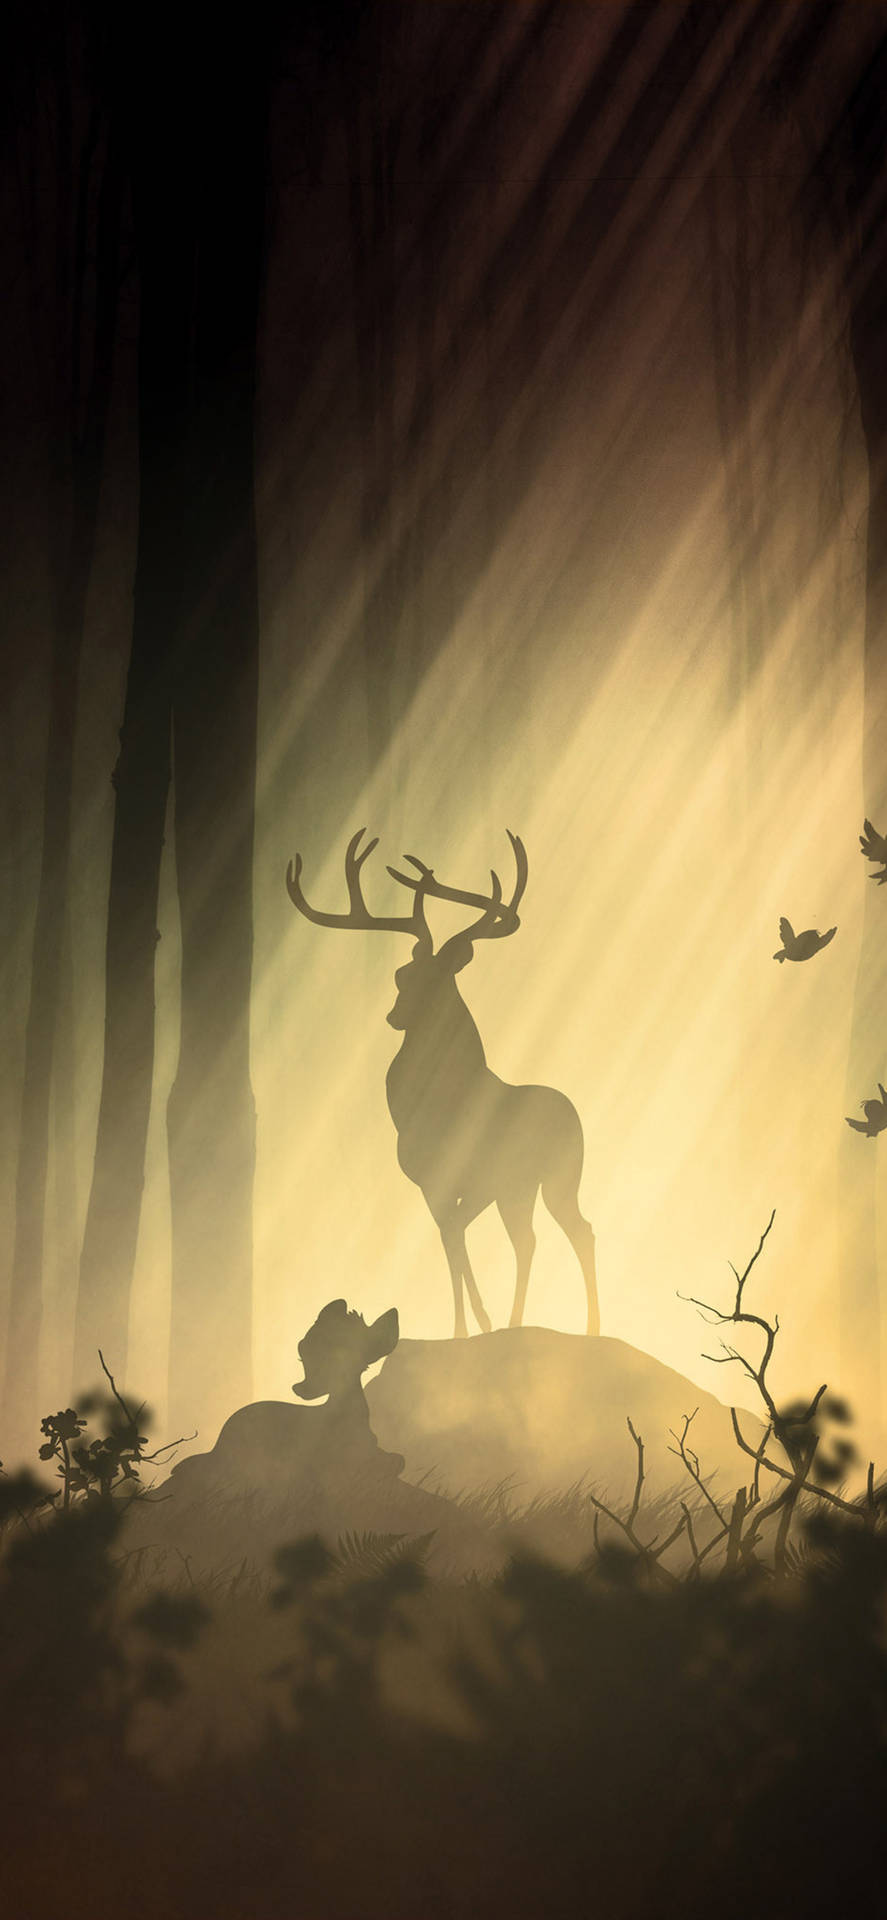 Explore nature with your Deer Iphone Wallpaper